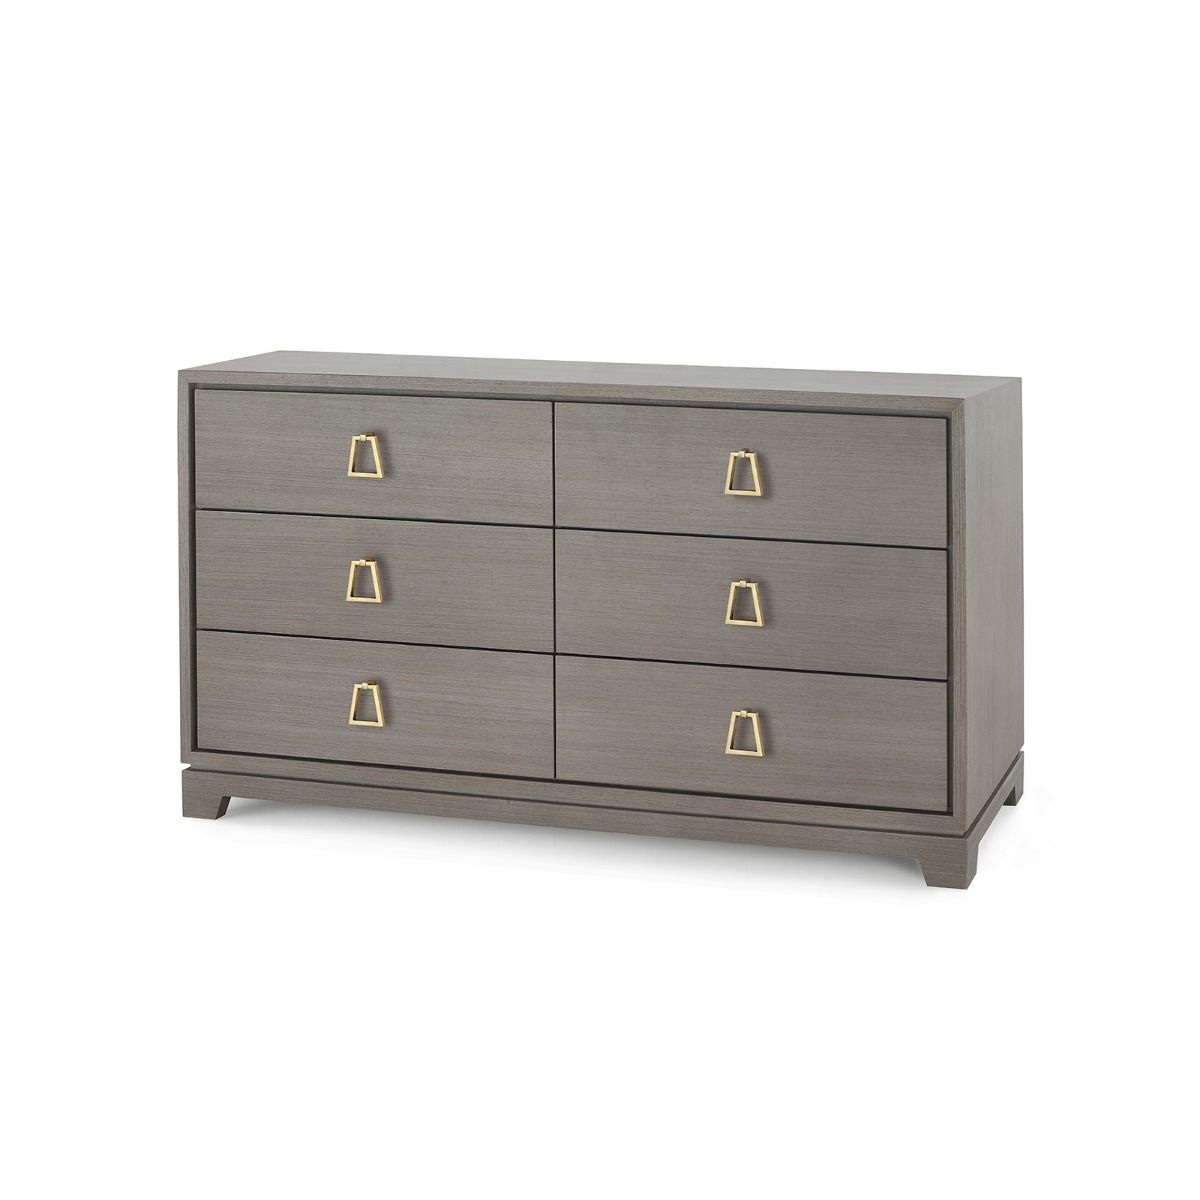 Load image into Gallery viewer, Stanford Extra Large 6-Drawer Tapue GrayDrawer Bungalow 5  Tapue Gray   Four Hands, Burke Decor, Mid Century Modern Furniture, Old Bones Furniture Company, Old Bones Co, Modern Mid Century, Designer Furniture, https://www.oldbonesco.com/
